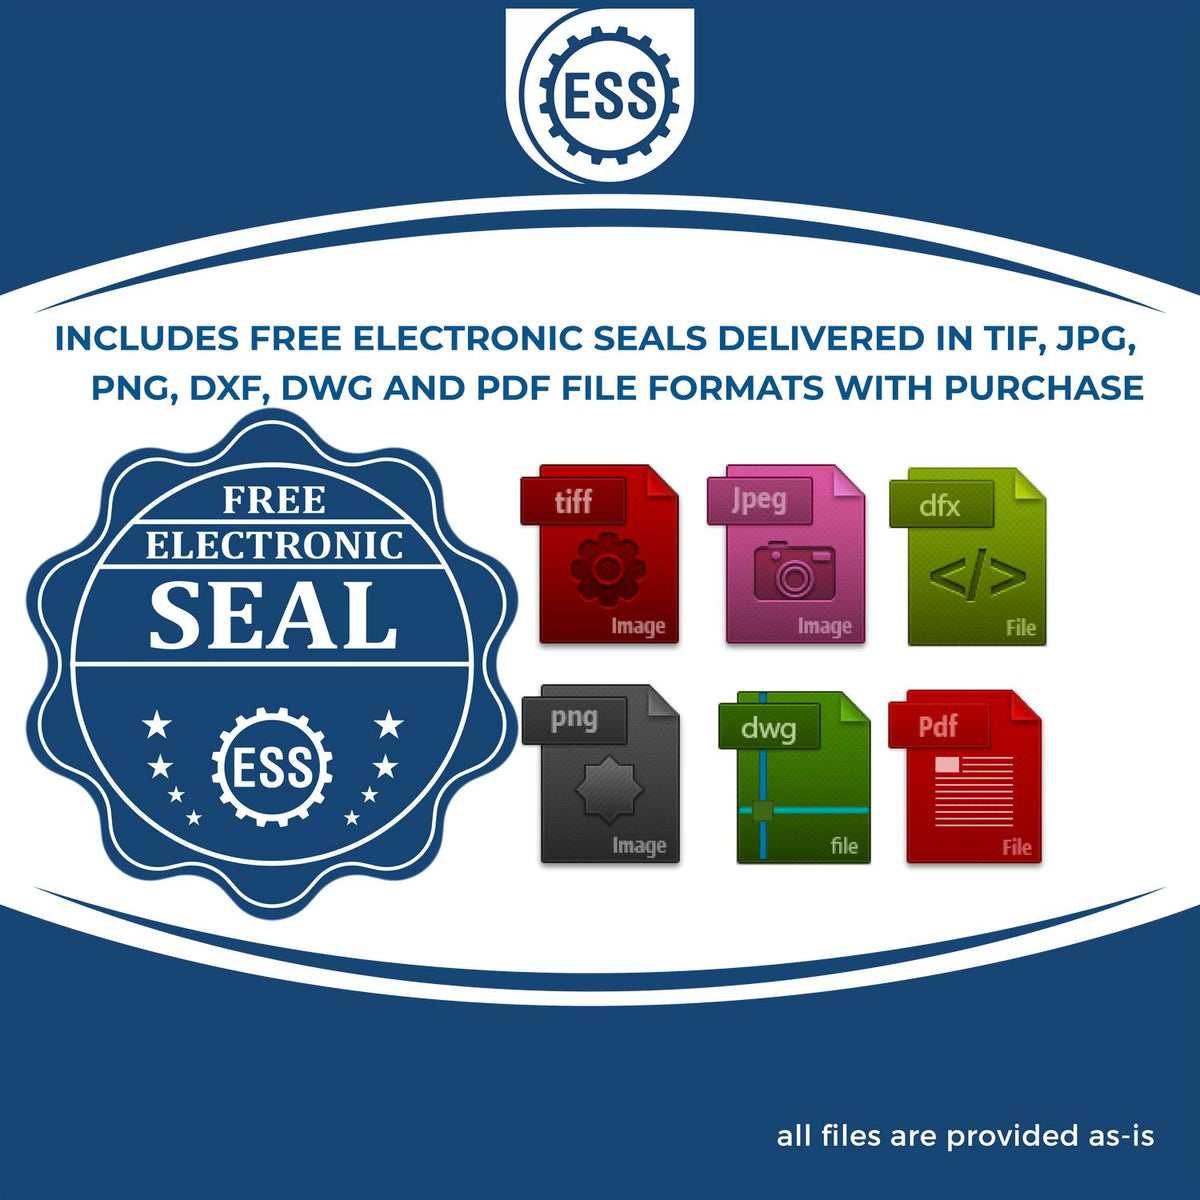 An infographic for the free electronic seal for the Heavy Duty Cast Iron Delaware Land Surveyor Seal Embosser illustrating the different file type icons such as DXF, DWG, TIF, JPG and PNG.